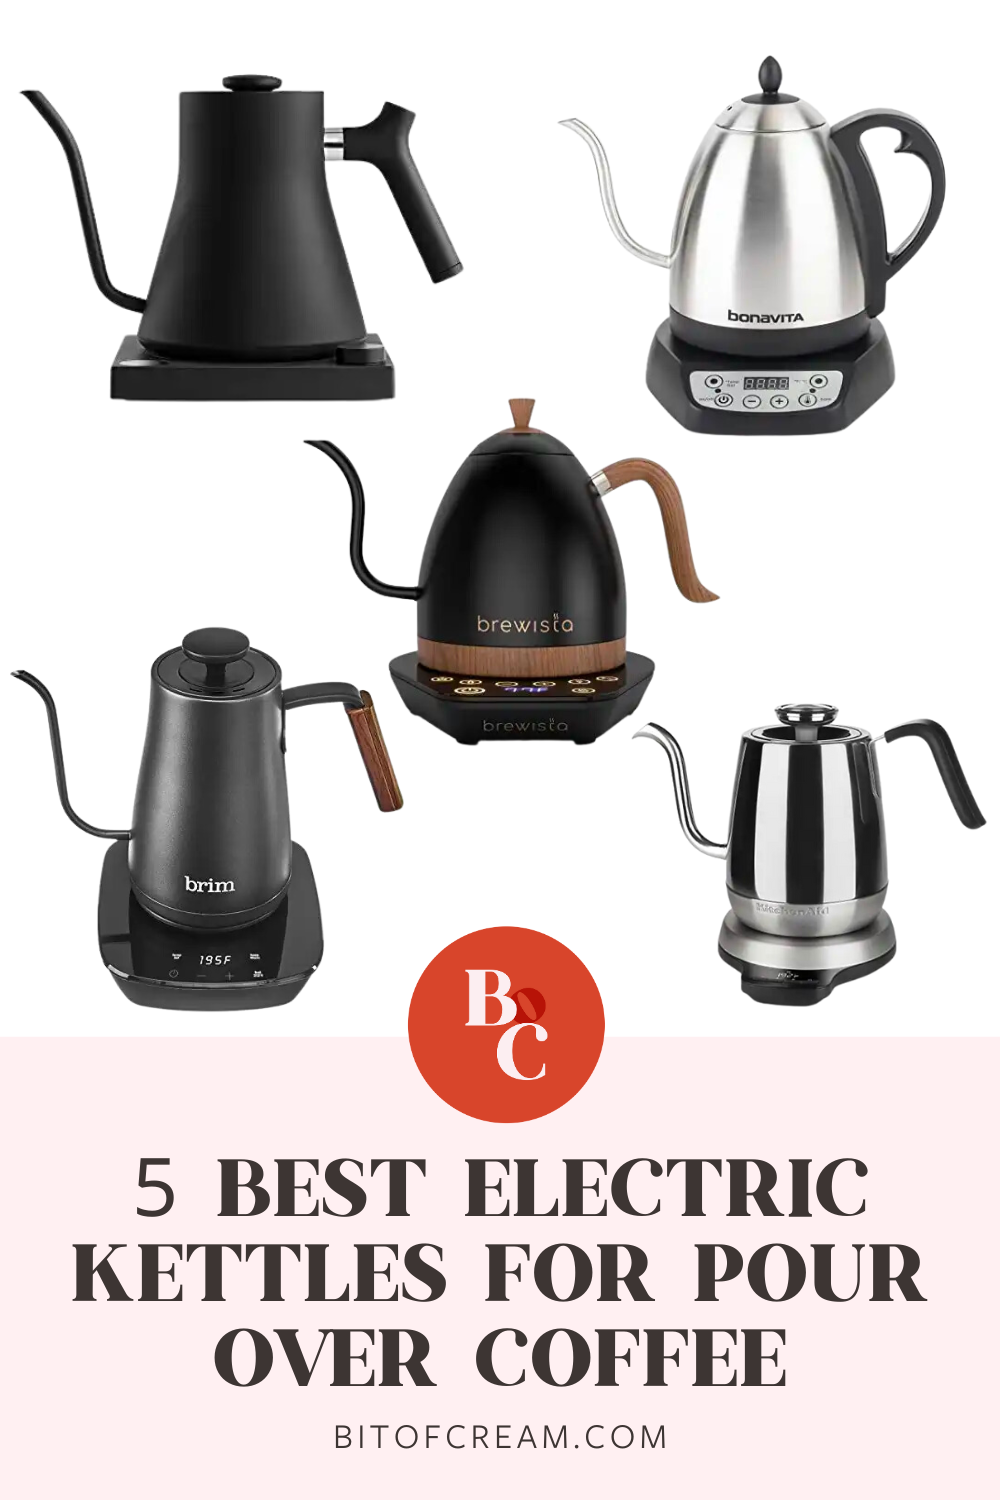 5 Best Electric Kettles For Pour Over Coffee